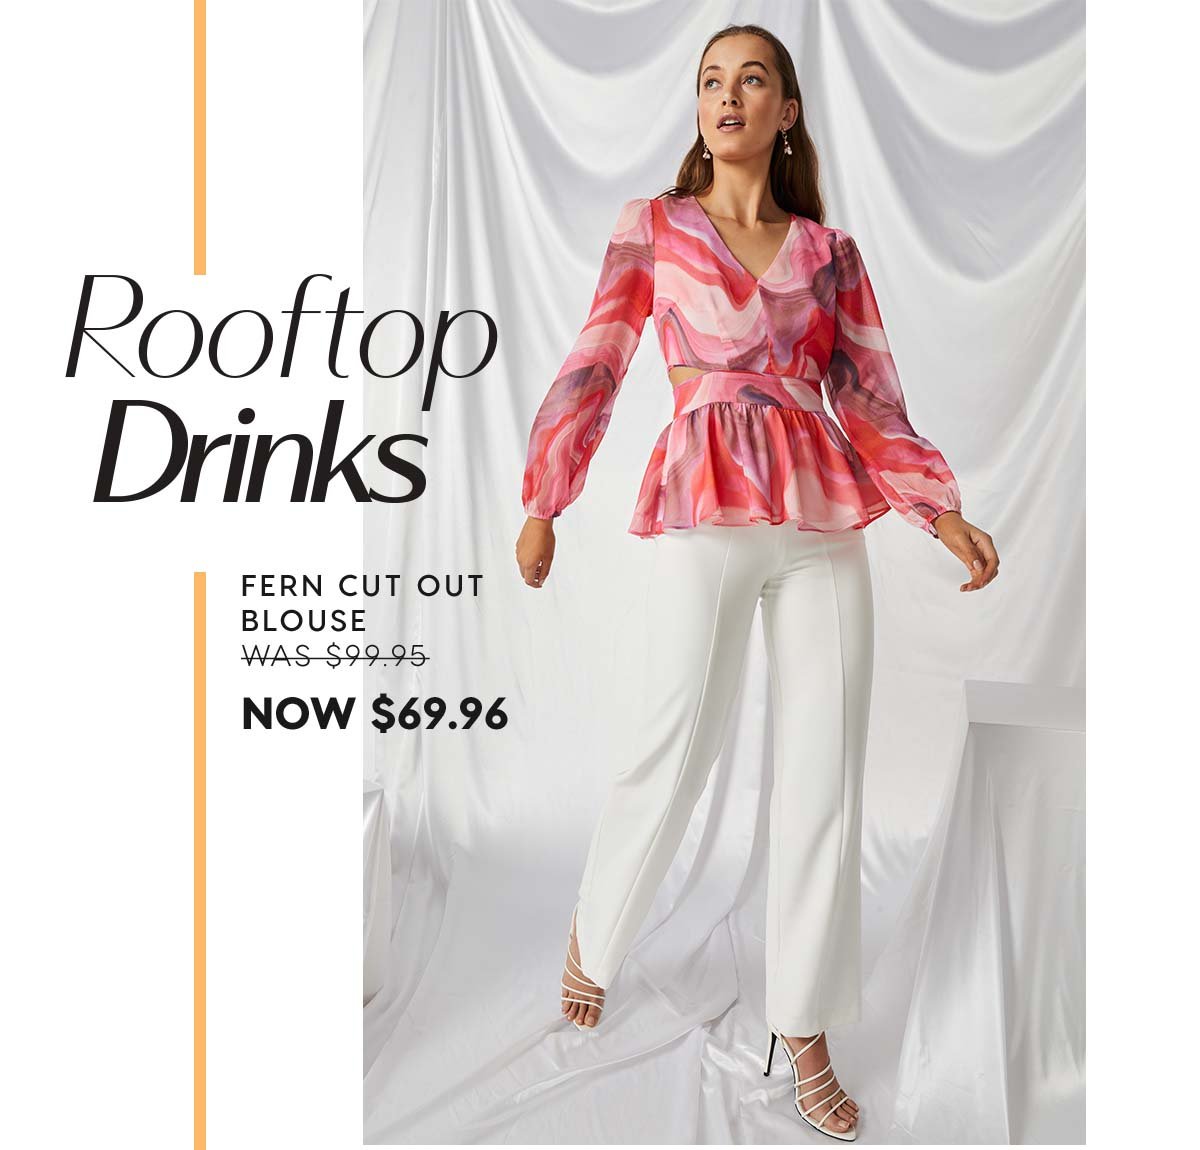 Rooftop Drinks. Fern Cut Out Blouse  WAS $99.95 NOW $69.96